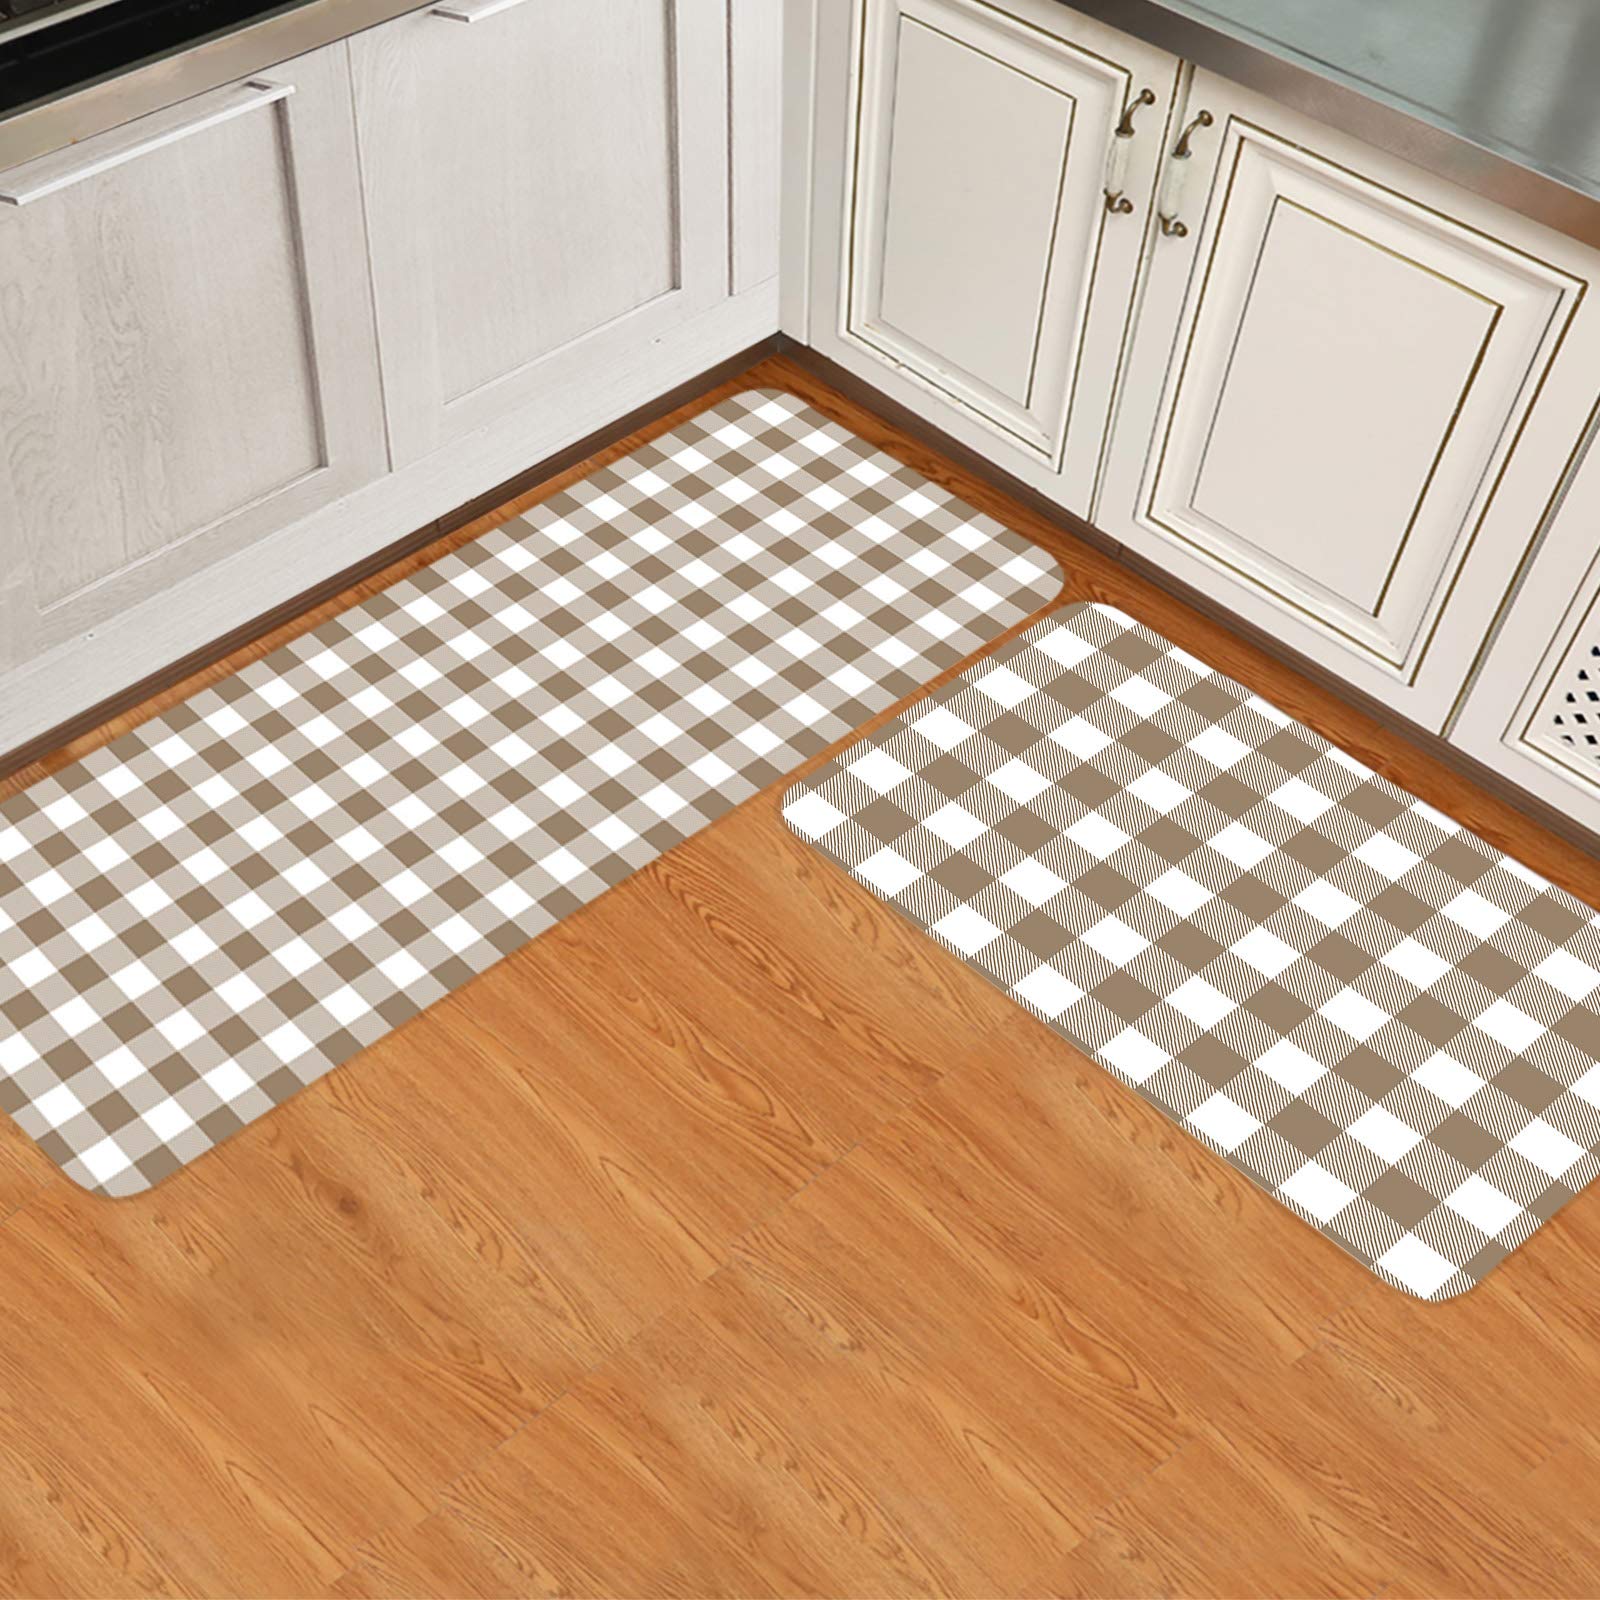 2 Pieces Kitchen Rugs Sets, Country Style Brown and White Checkered Plaid Gingham Non-Slip Hallway Stair Runner Rug Mats Doormat for Floor, Office, Sink, Laundry